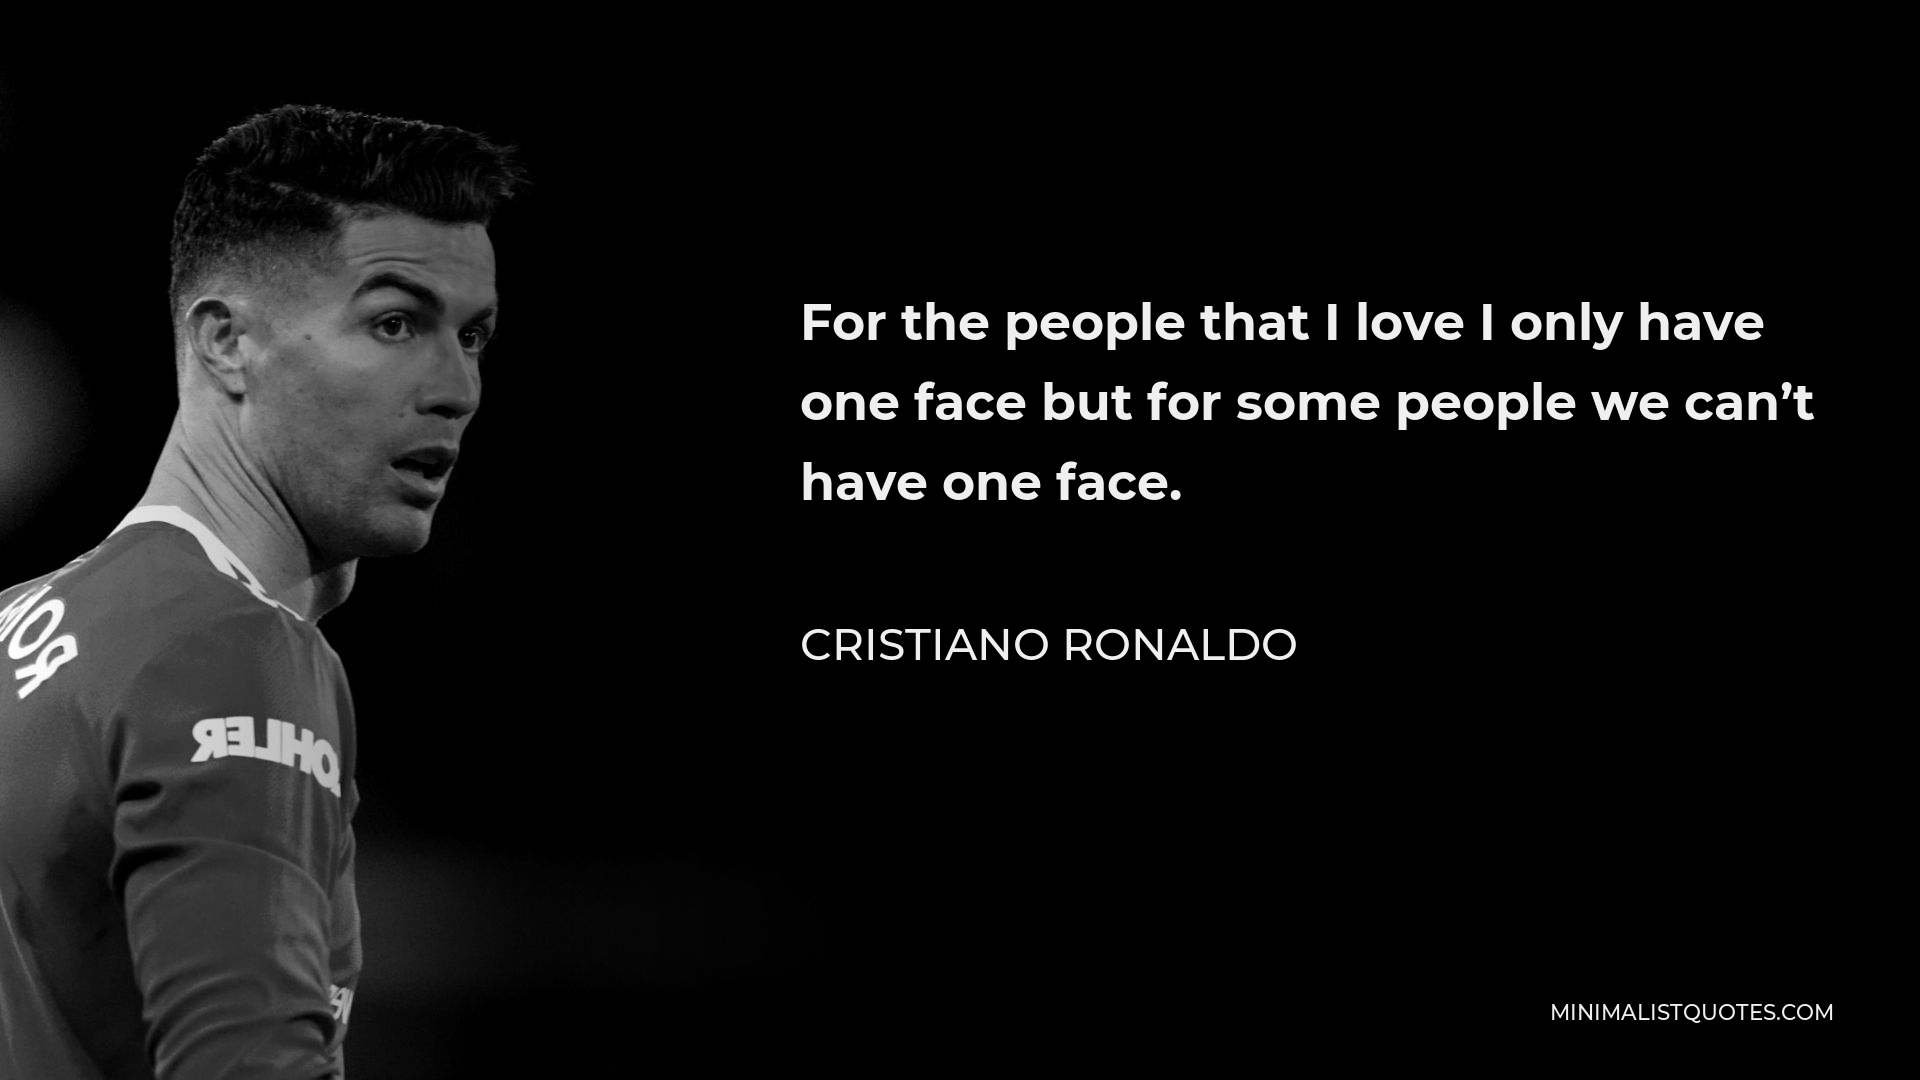 Cristiano Ronaldo Quote - For the people that I love I only have one face but for some people we can’t have one face.